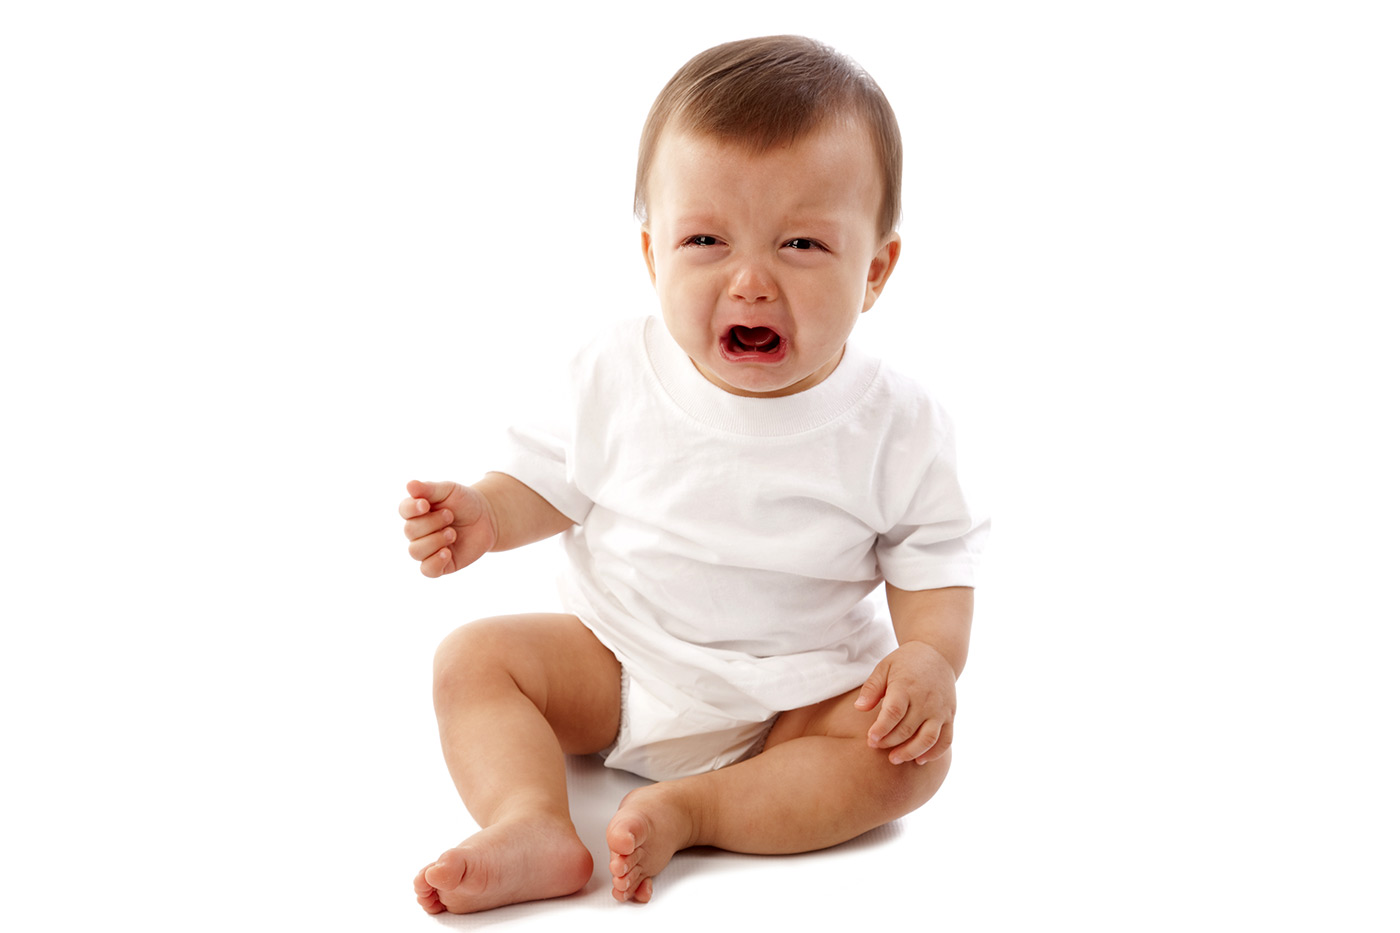 Separation Anxiety in Babies - Sleeping Should Be Easy